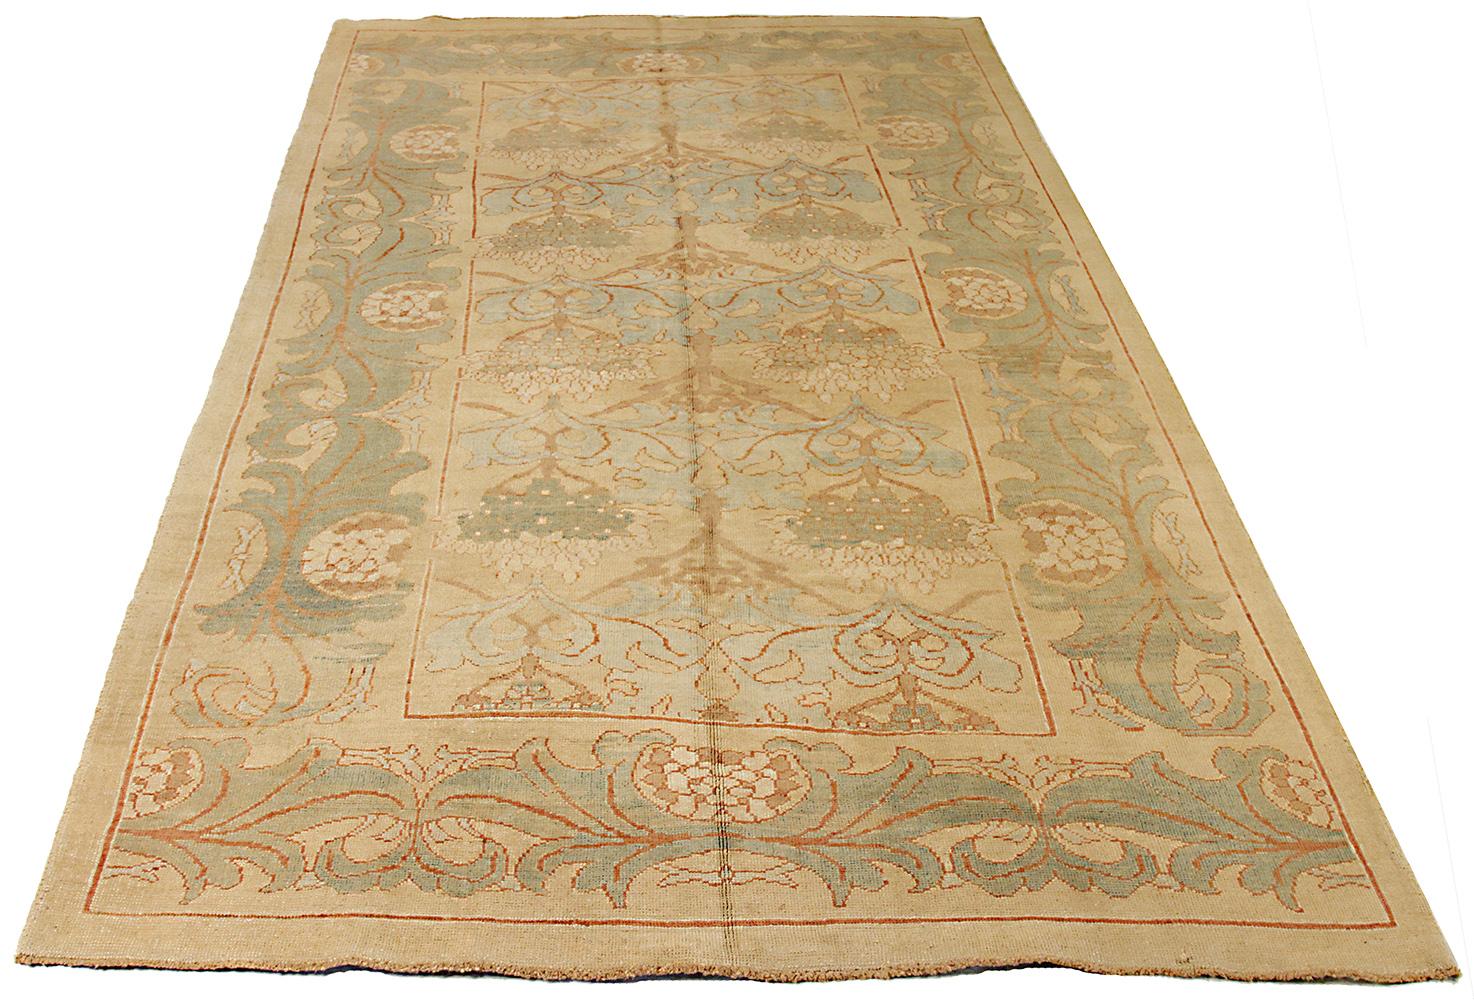 Contemporary handmade Turkish area rug from high-quality sheep’s wool and colored with eco-friendly vegetable dyes that are proven safe for humans and pets alike. It’s a Donegal design showcasing a beige field with beautiful gray and green floral